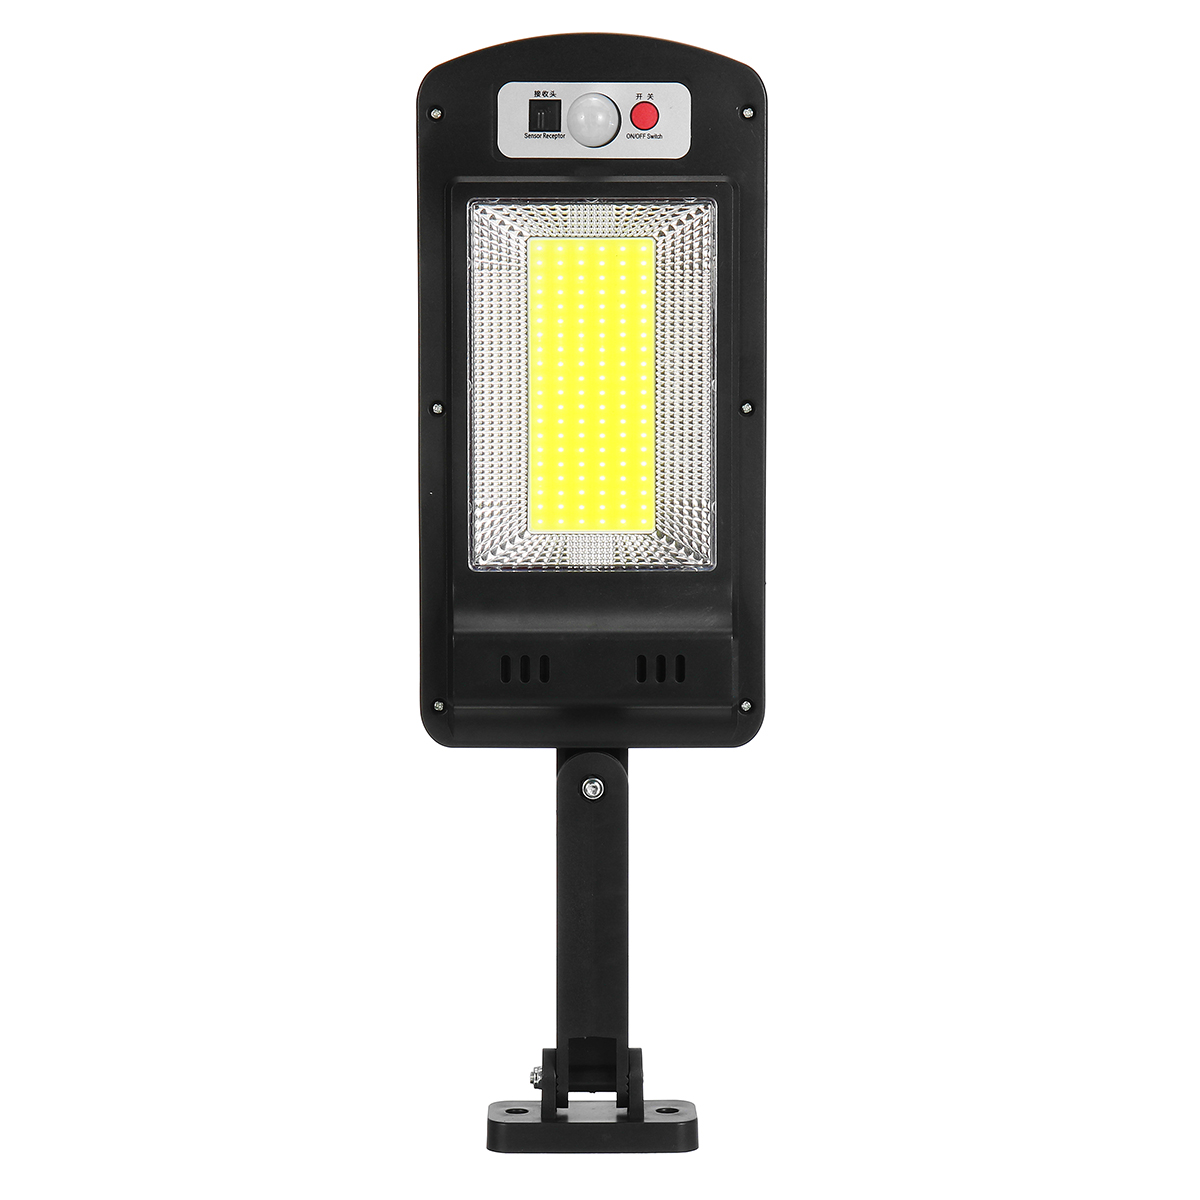 Find LED Solar COB Light PIR Motion Sensor Induction Wall Street Road Garden Lamp Remote Control for Sale on Gipsybee.com with cryptocurrencies